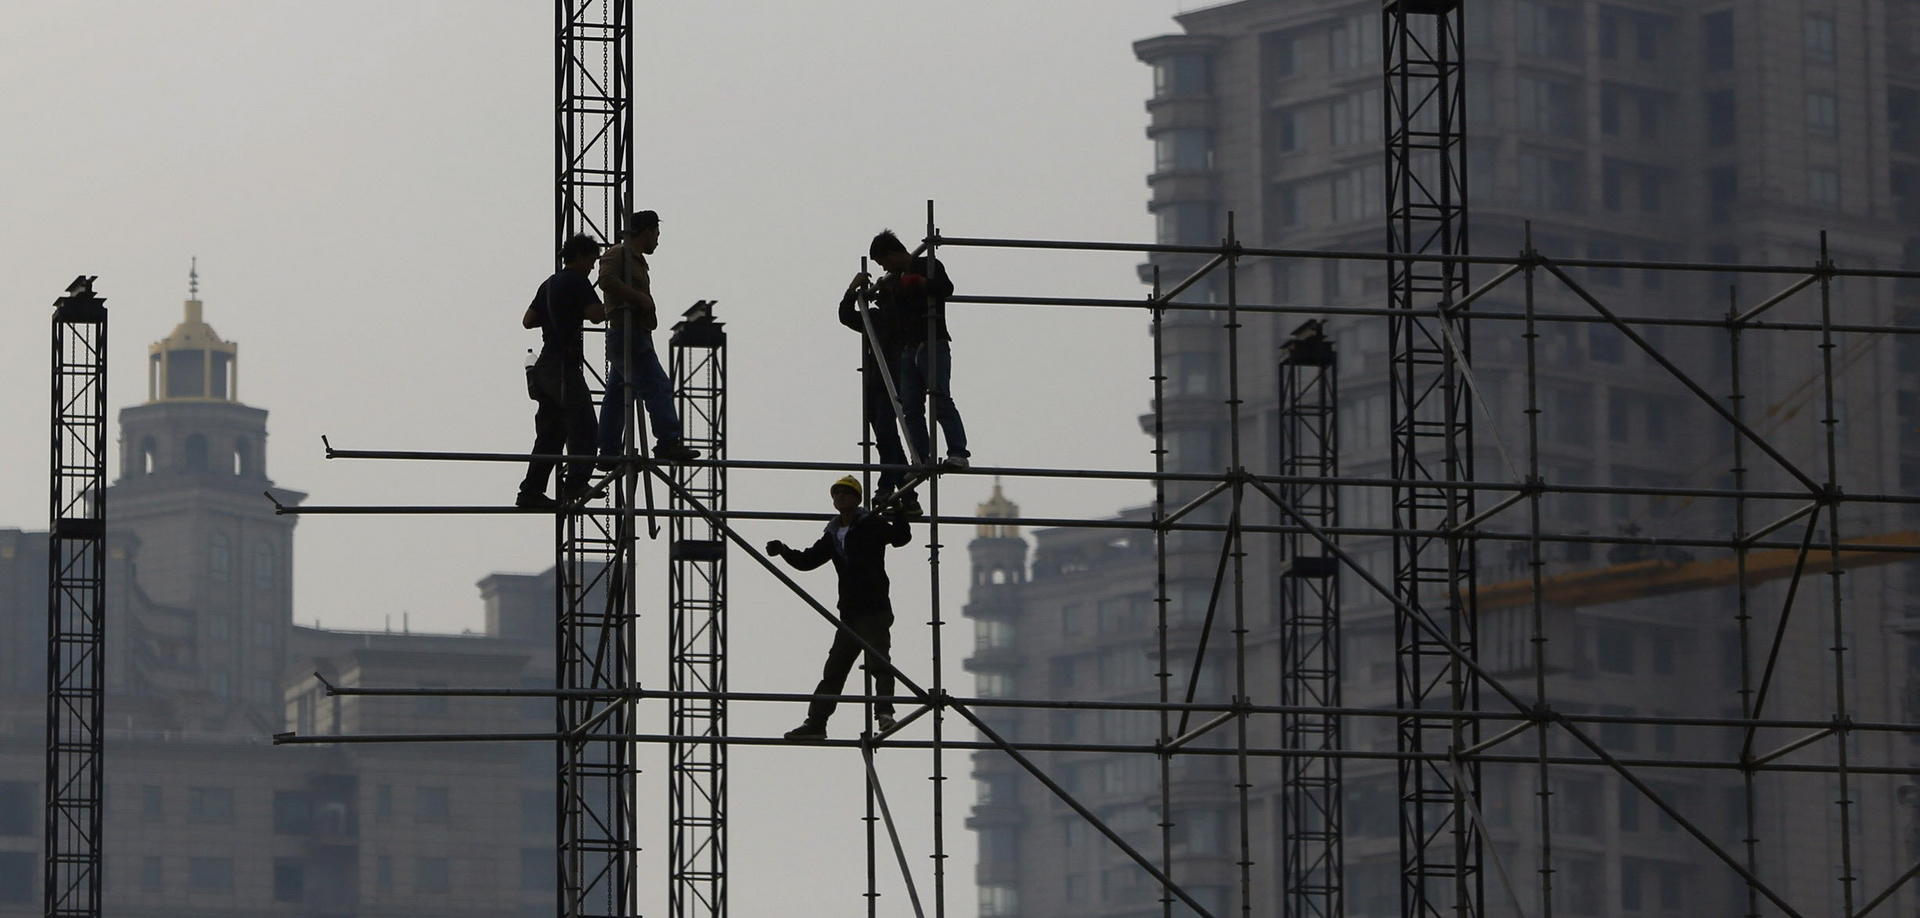 Property investment in China fell in the first quarter to 12 per cent of GDP, with new home starts down more than 25 per cent. Photo: Reuters